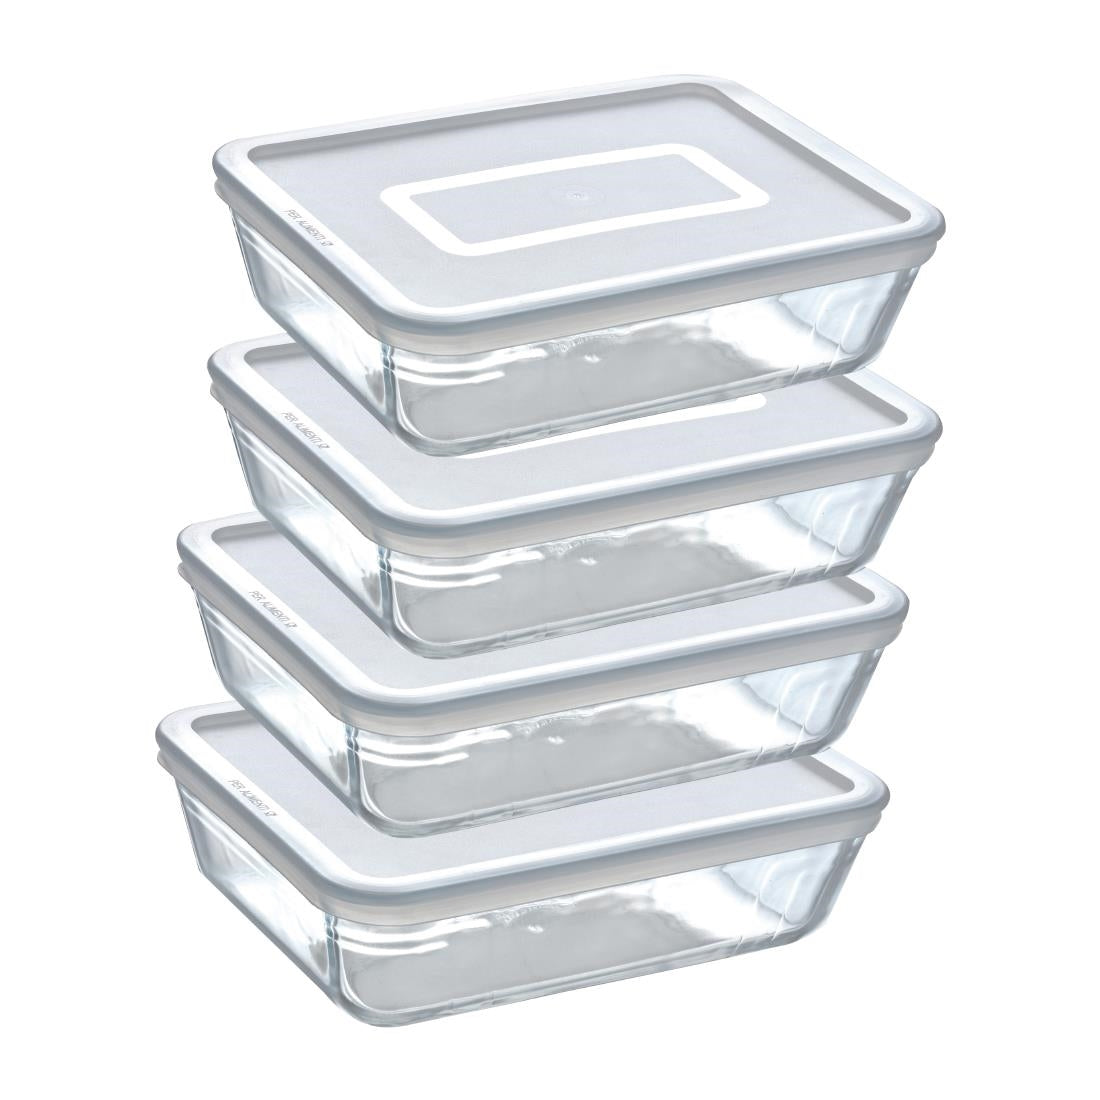 FS360 Pyrex Batch Cooking Cook & Freeze Food Storage Glass Containers Set Of 4 1.5 Ltr JD Catering Equipment Solutions Ltd